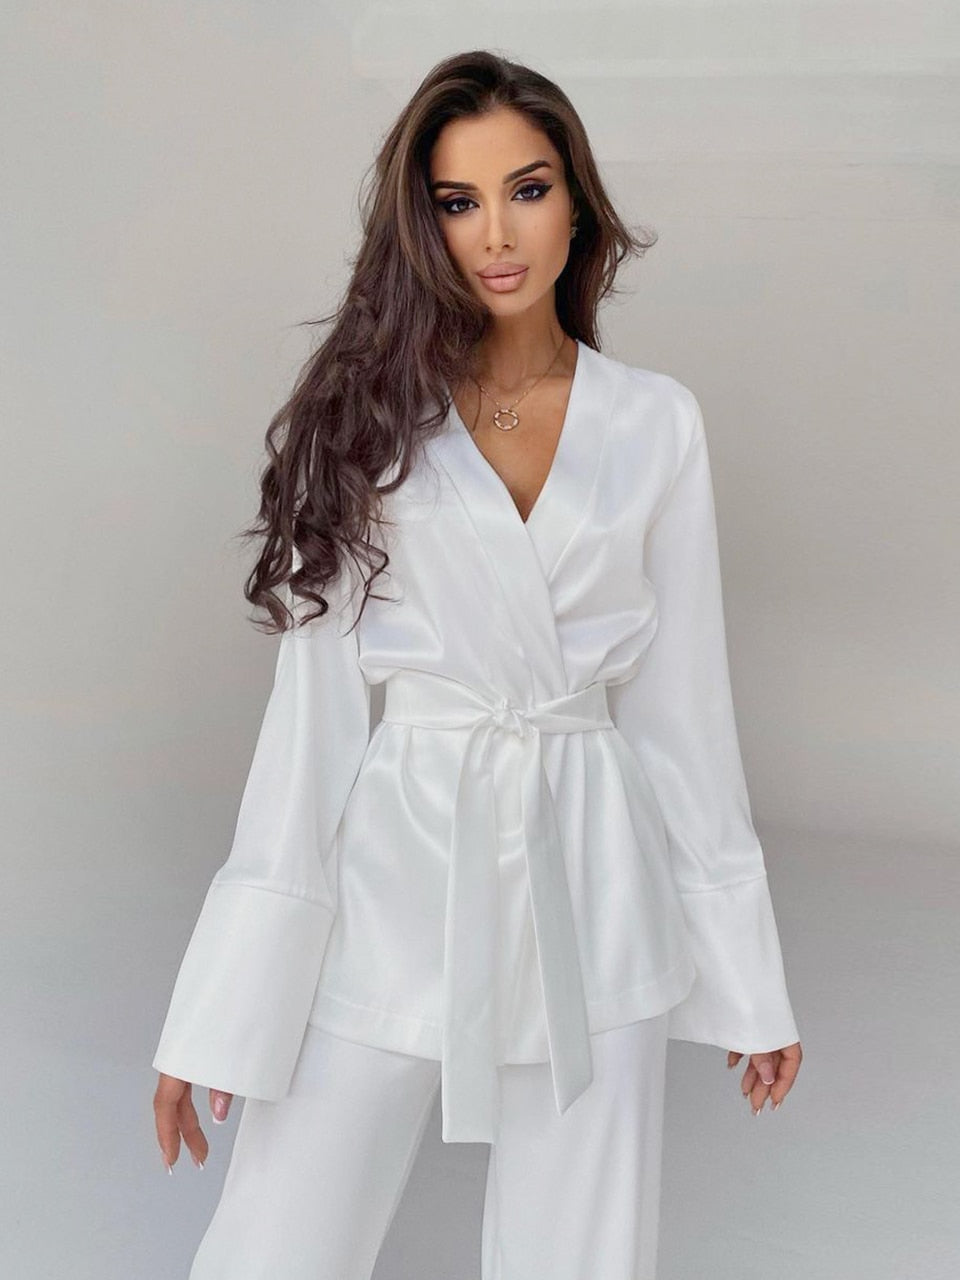 Wenkouban Solid Color Pajamas For Women Robe Sets Full Sleeves Women's Home Clothes Trouser Suits Satin Nightgowns Spring 2022 Loungewear